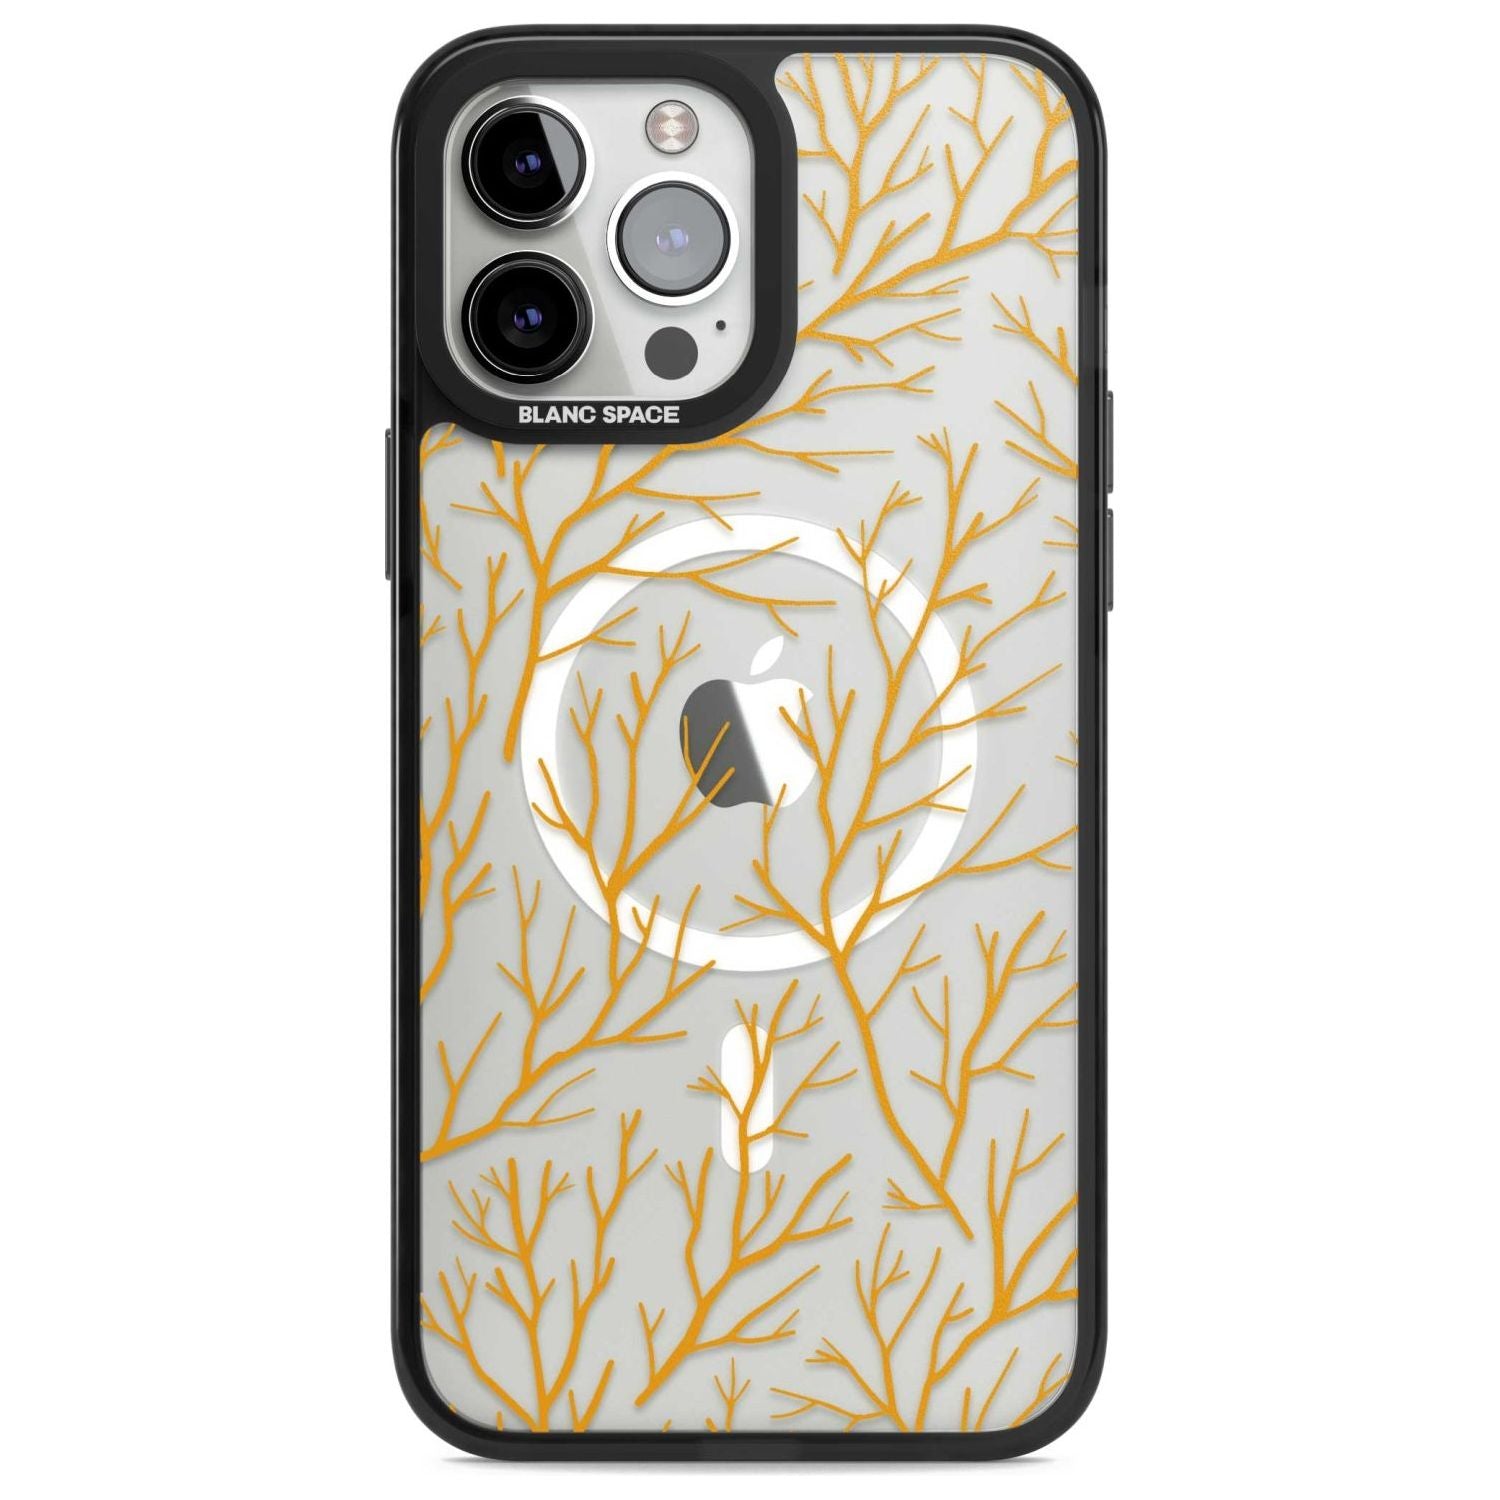 Personalised Bramble Branches Pattern Custom Phone Case iPhone 13 Pro Max / Magsafe Black Impact Case Blanc Space